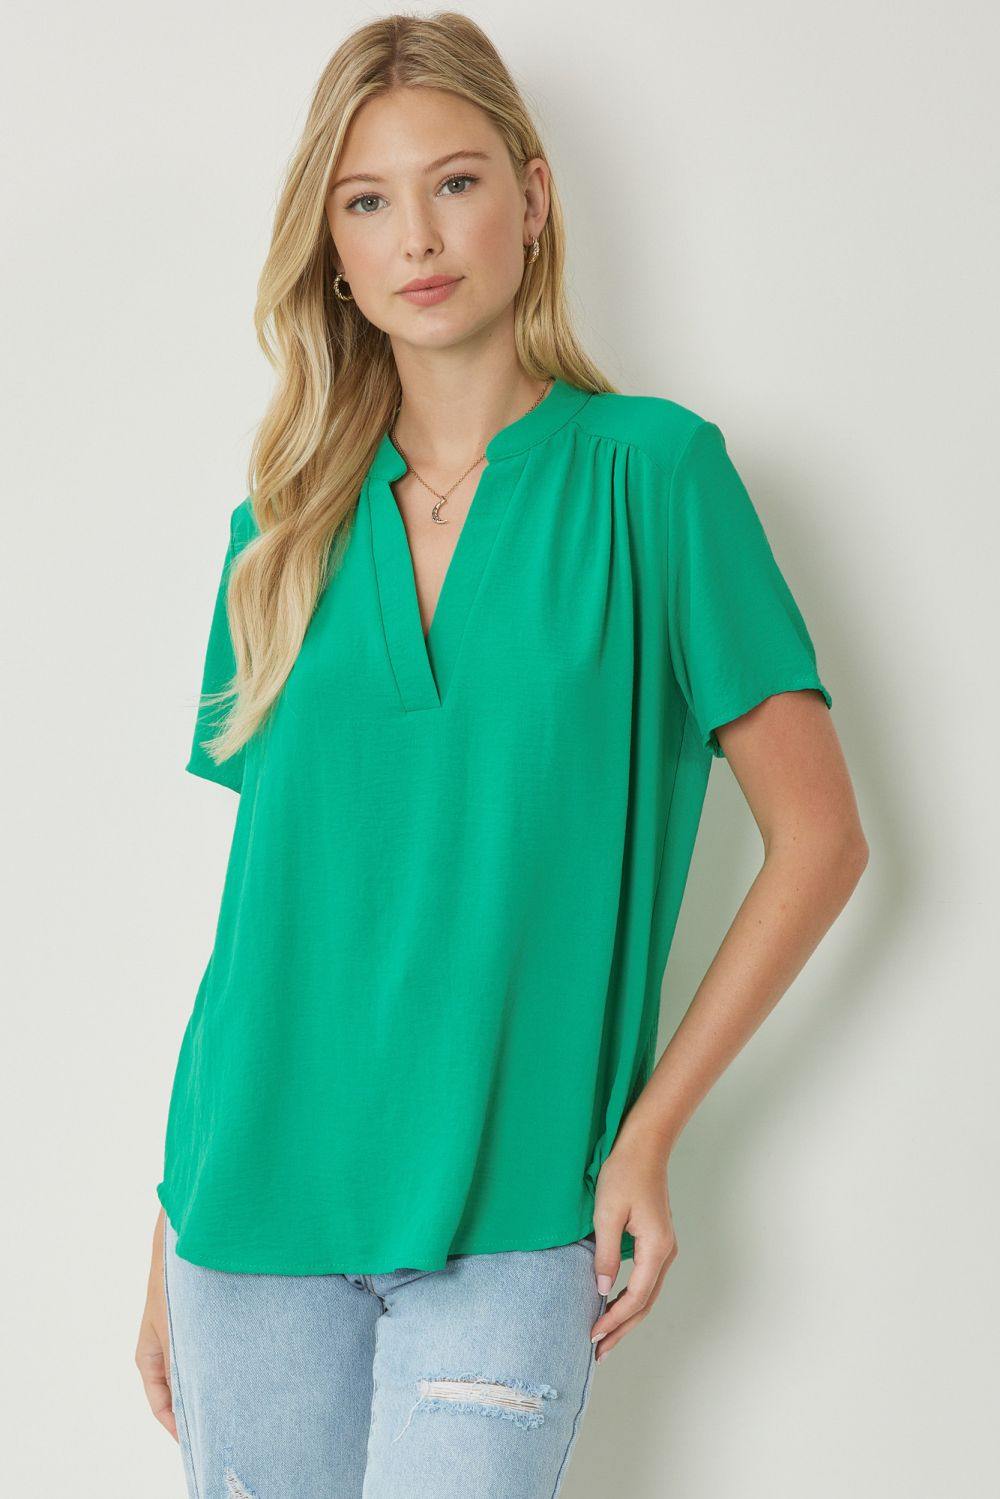 entro brand basic colorful tops Mock Collar Pleat Detailed kelly green